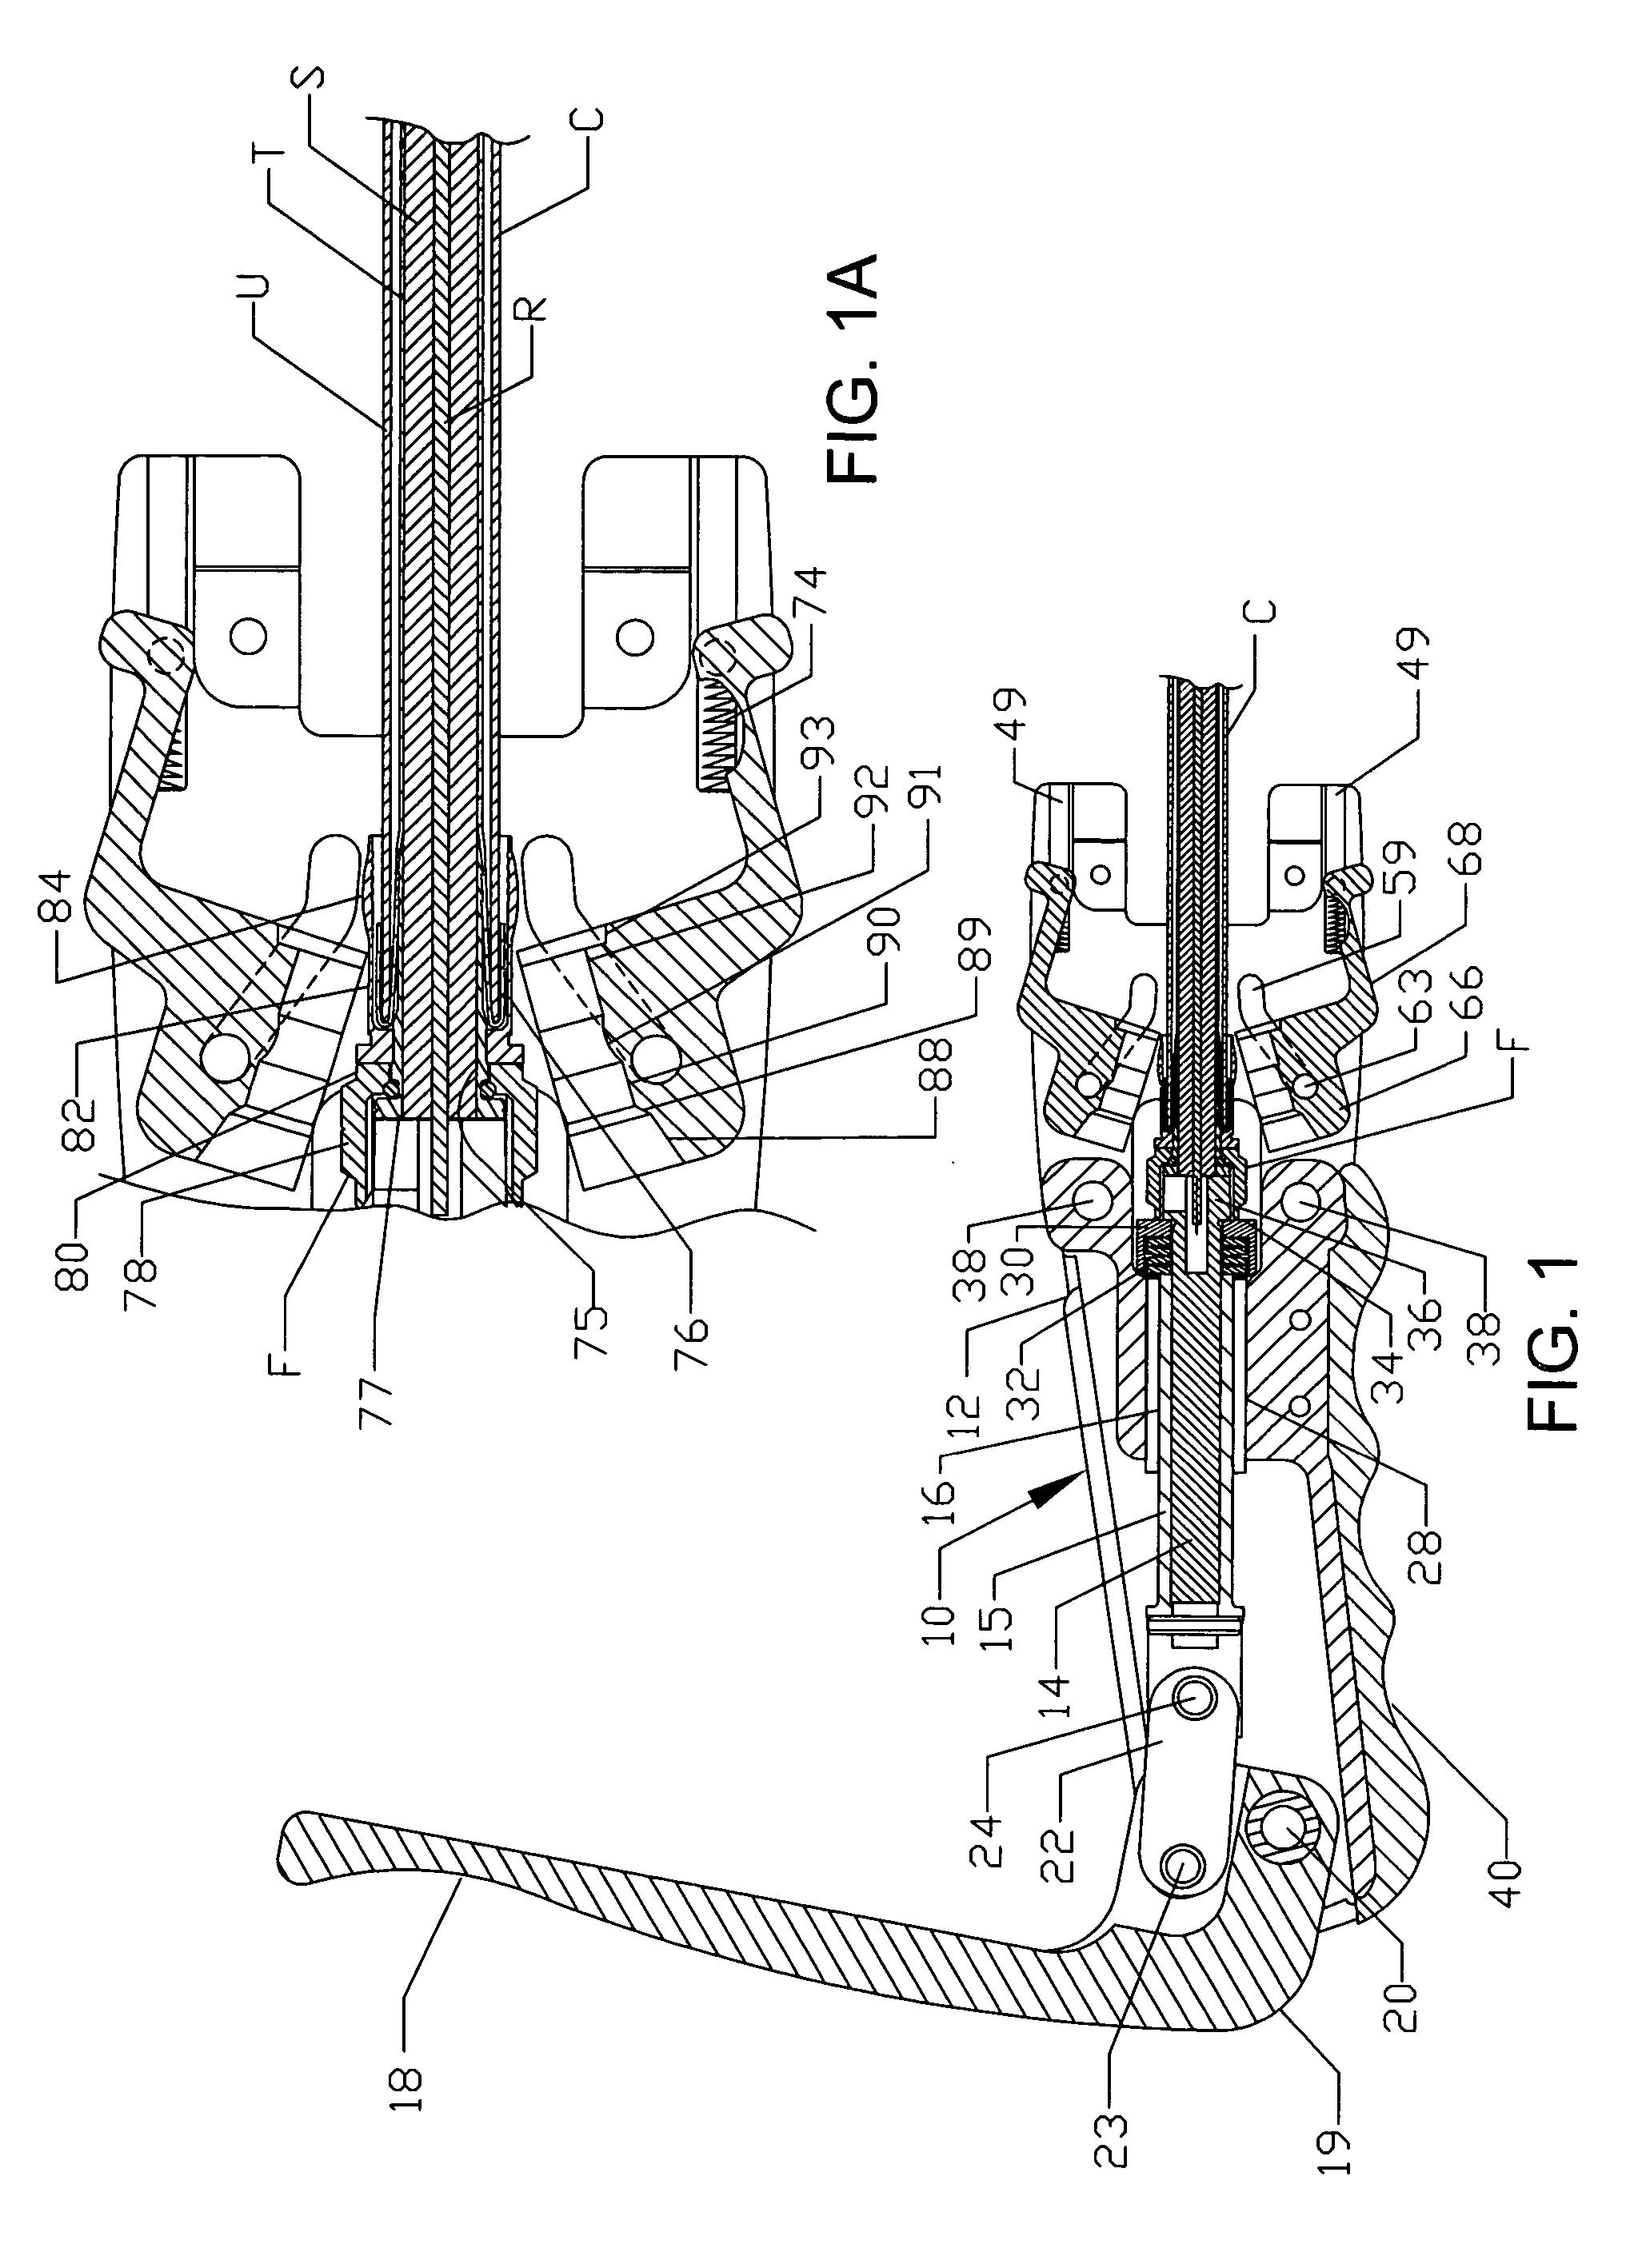 Coaxial cable fitting and crimping tool